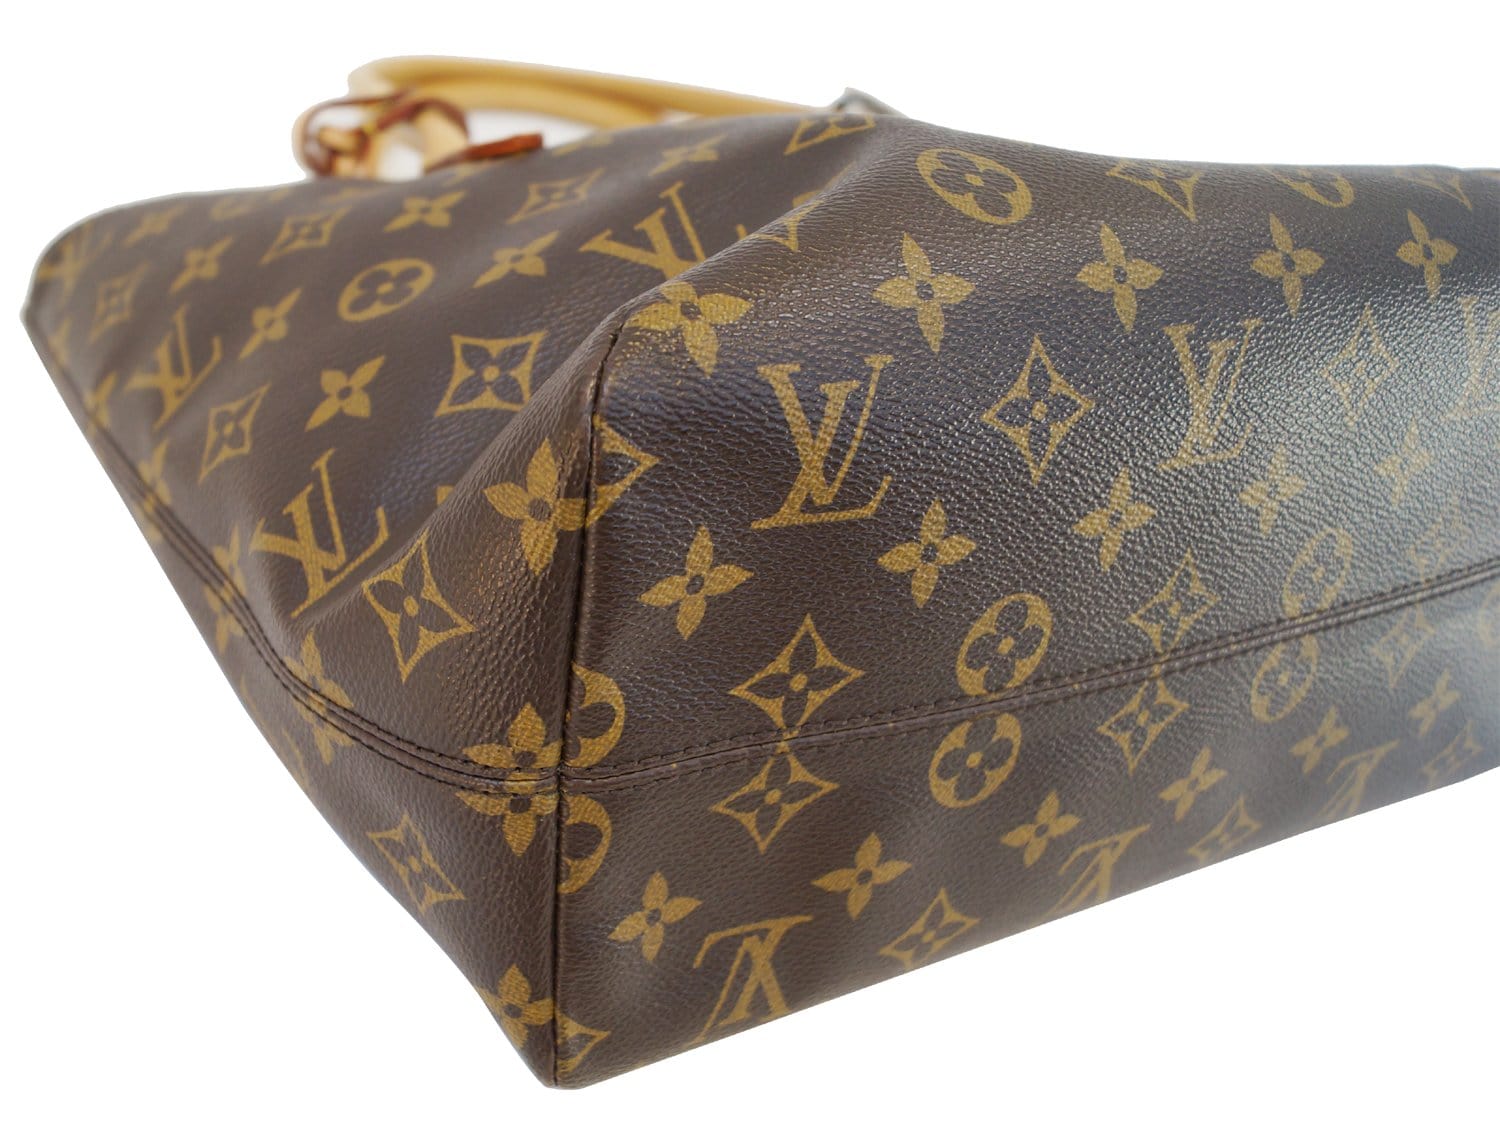  Shopbop Archive Women's Pre-Loved Louis Vuitton Raspail Pm  Tote, Monogram, Brown, One Size : Clothing, Shoes & Jewelry